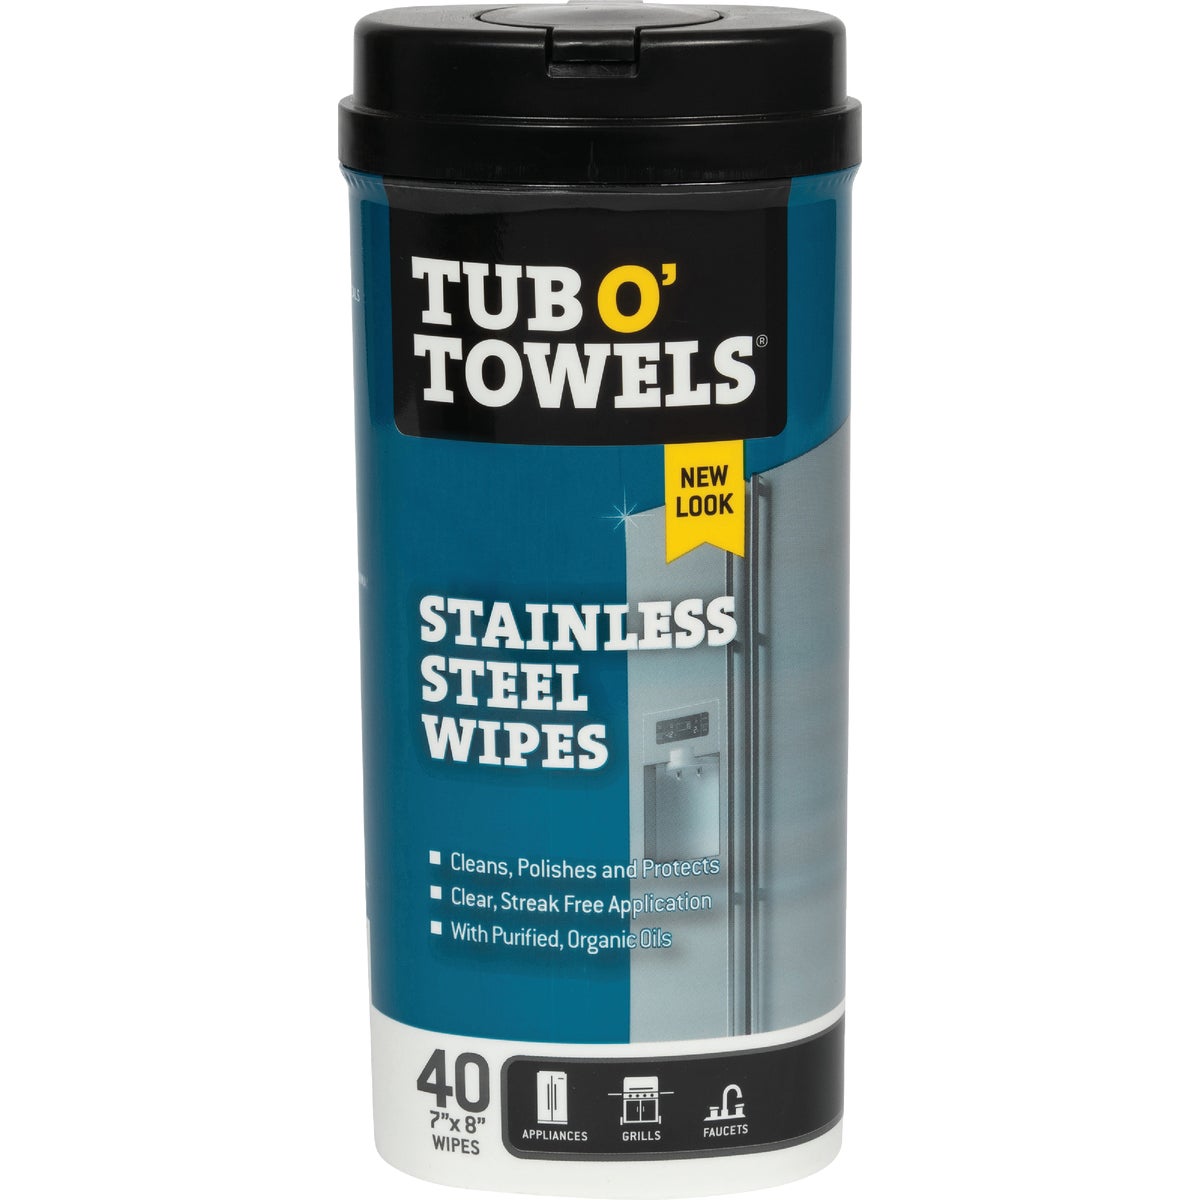 Item 602436, Tub O' Towels Stainless Steel Wipes remove fingerprints, water marks, 